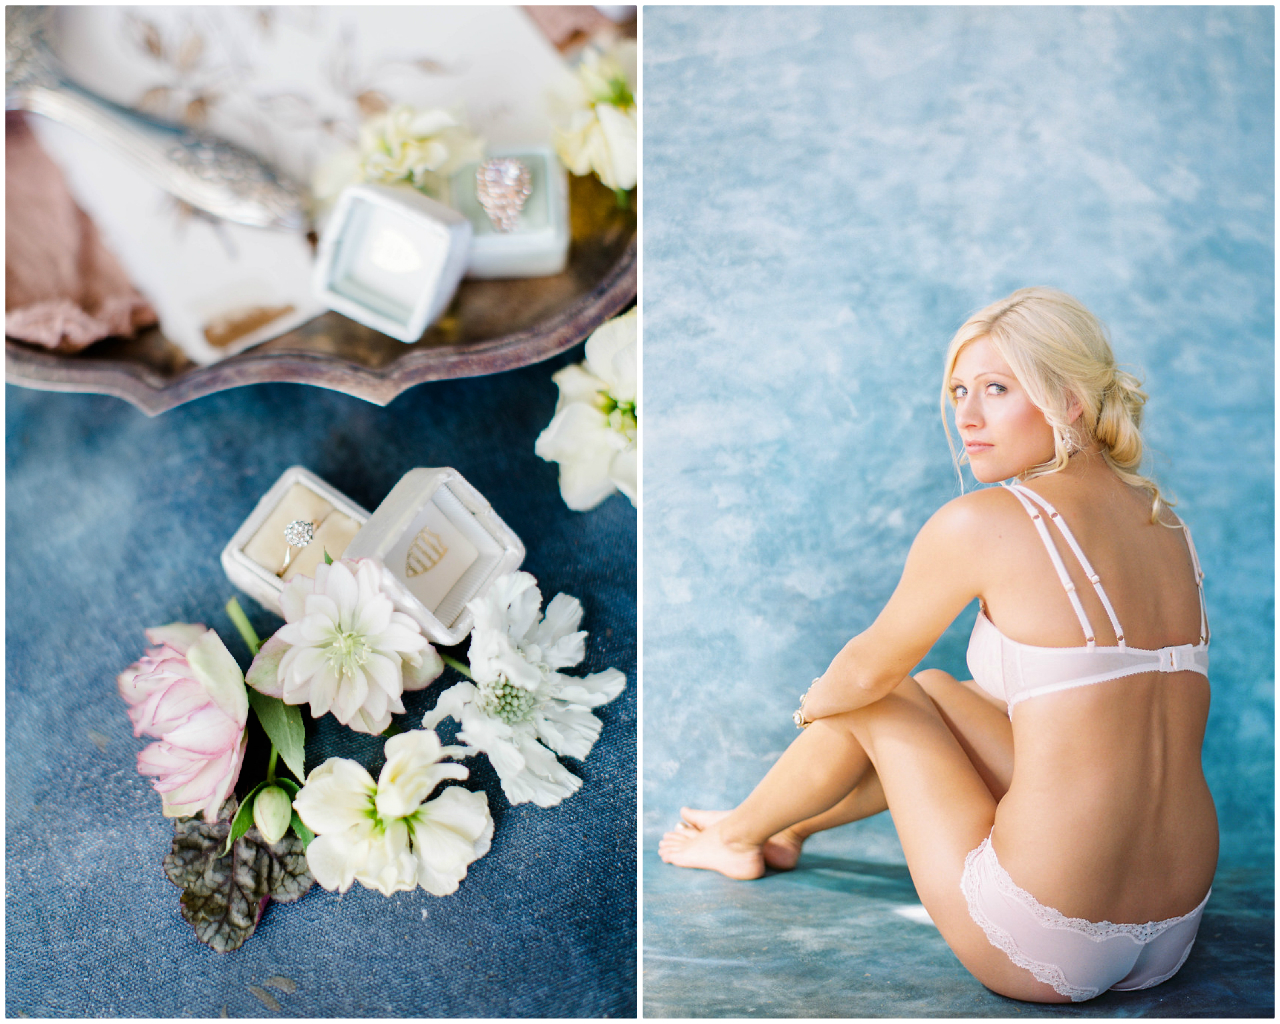 Styled Boudior Photography | The Day's Design | Ashley Slater Photography